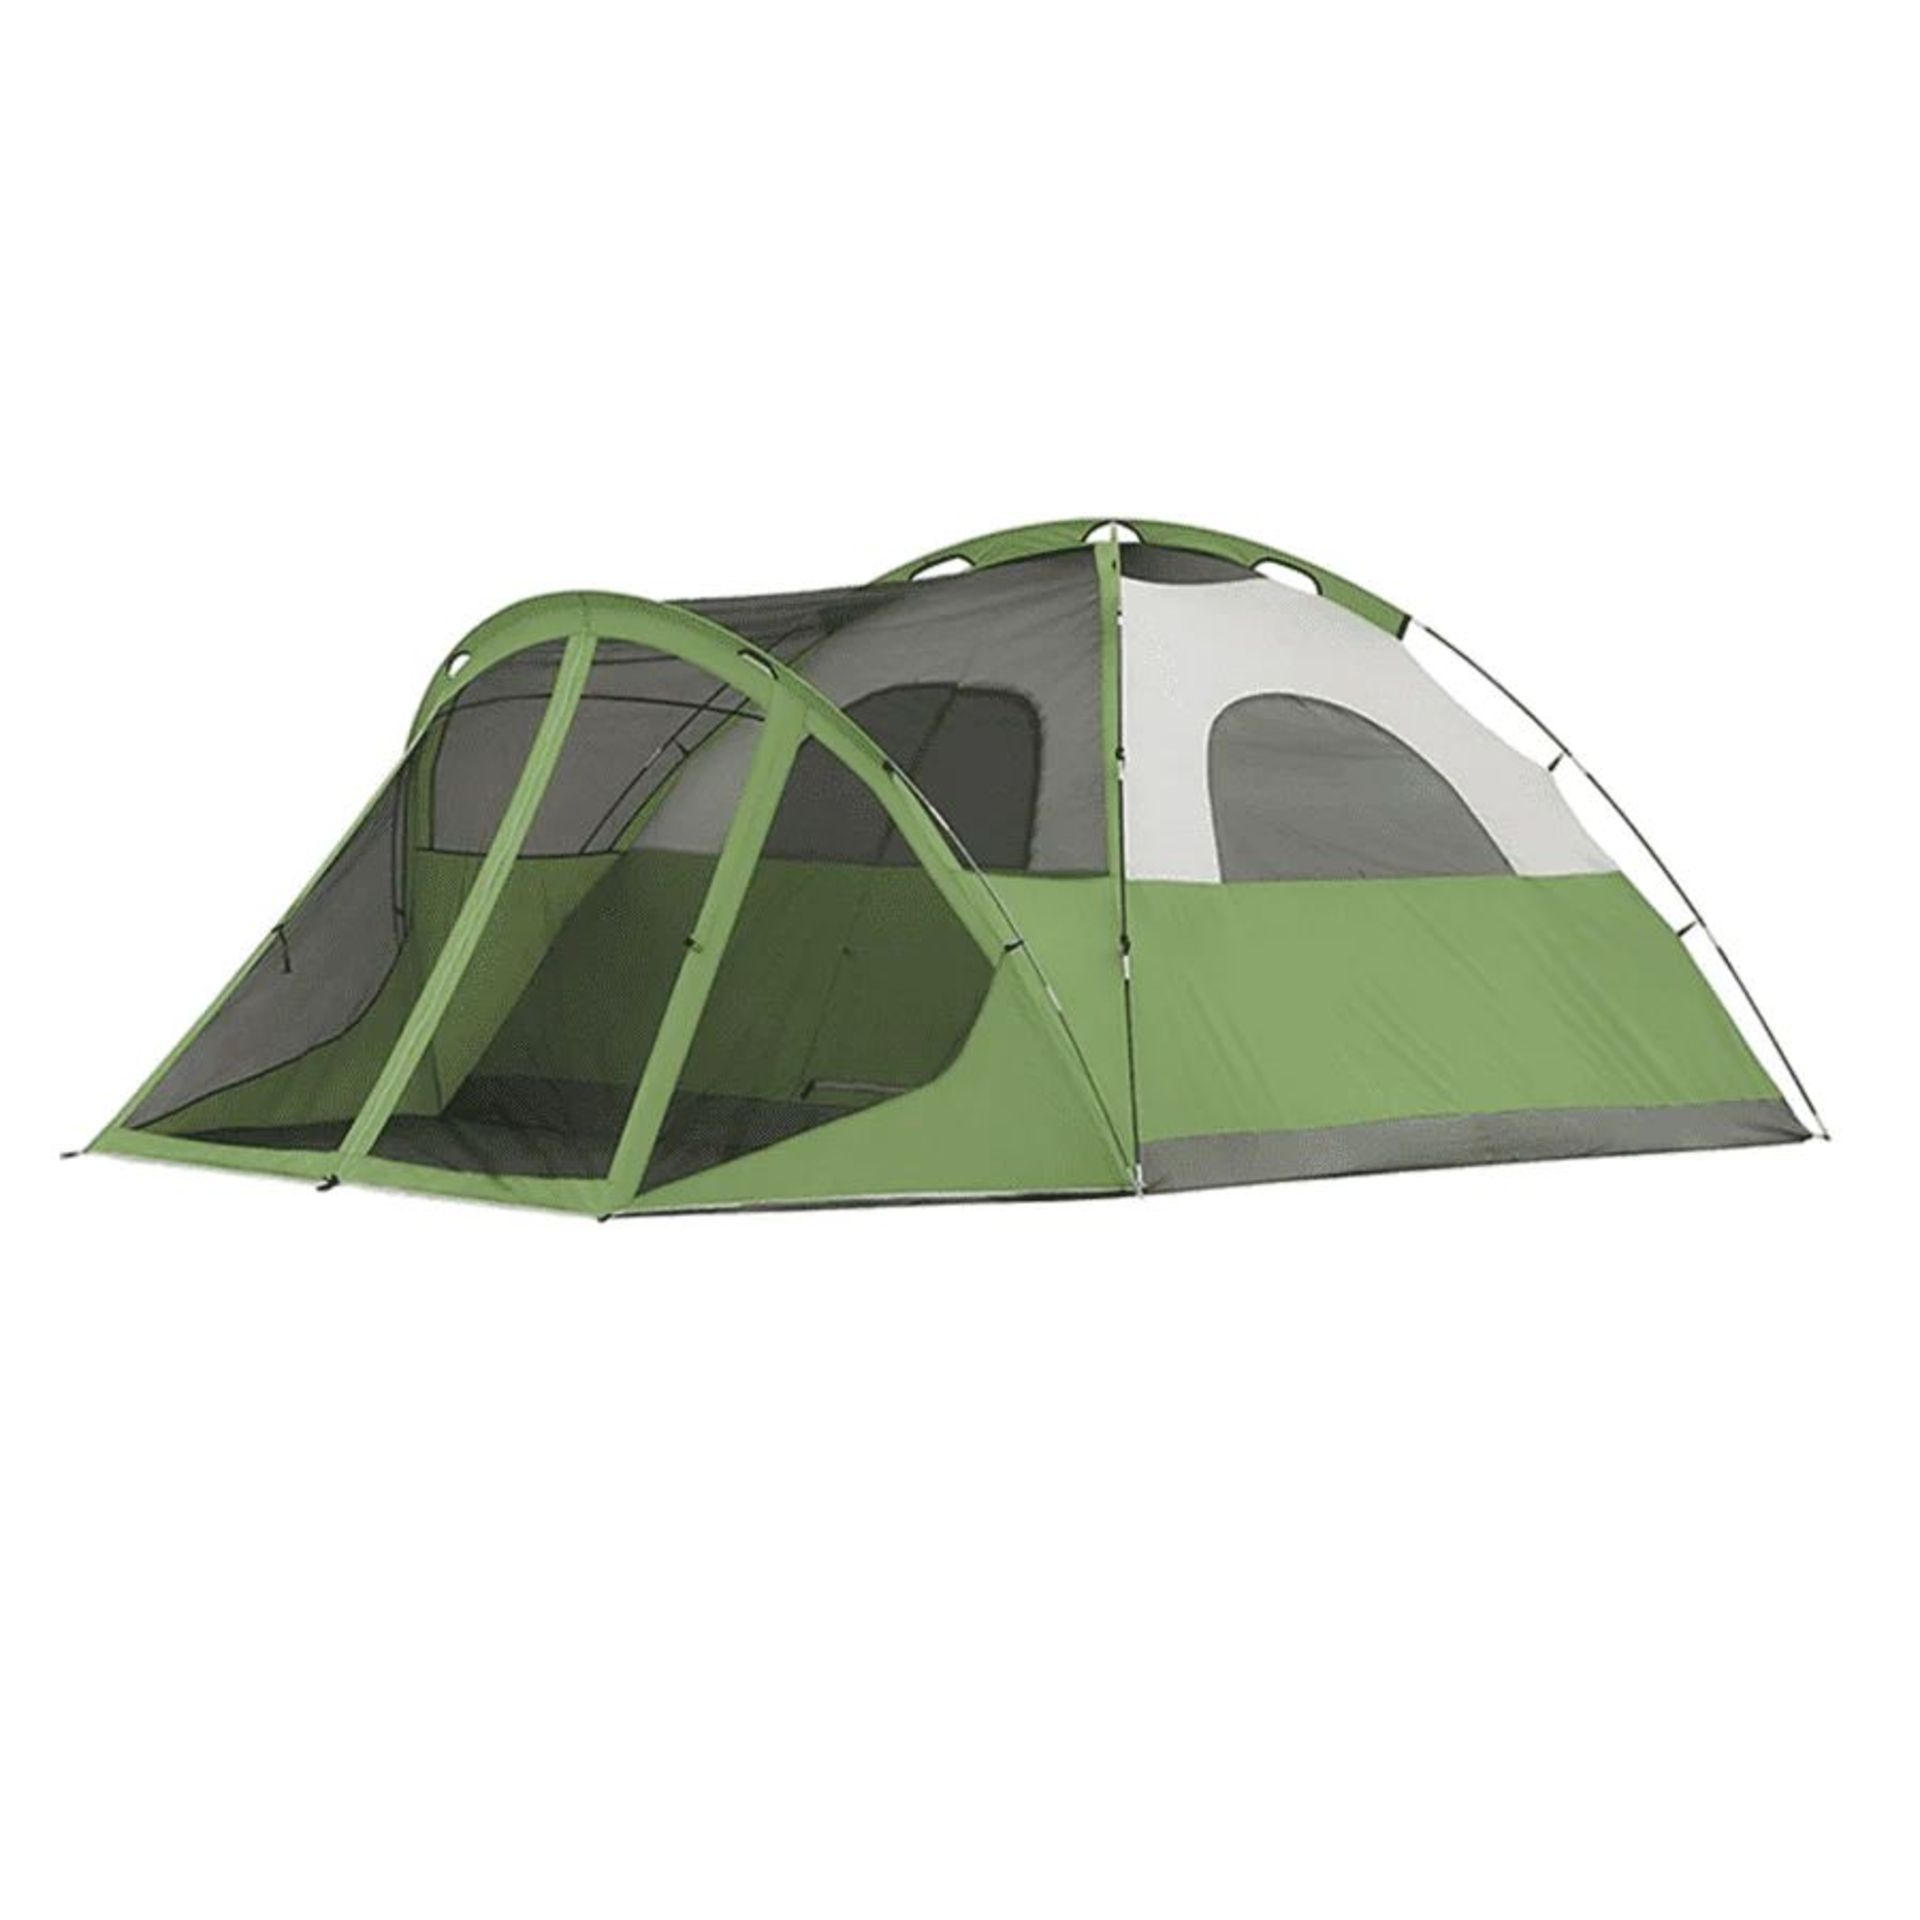 RBSM SPORTS 6-PERSON DOME CAMPING TENT W/ RAINFLY (NEW) (MSRP $300) - Image 2 of 4